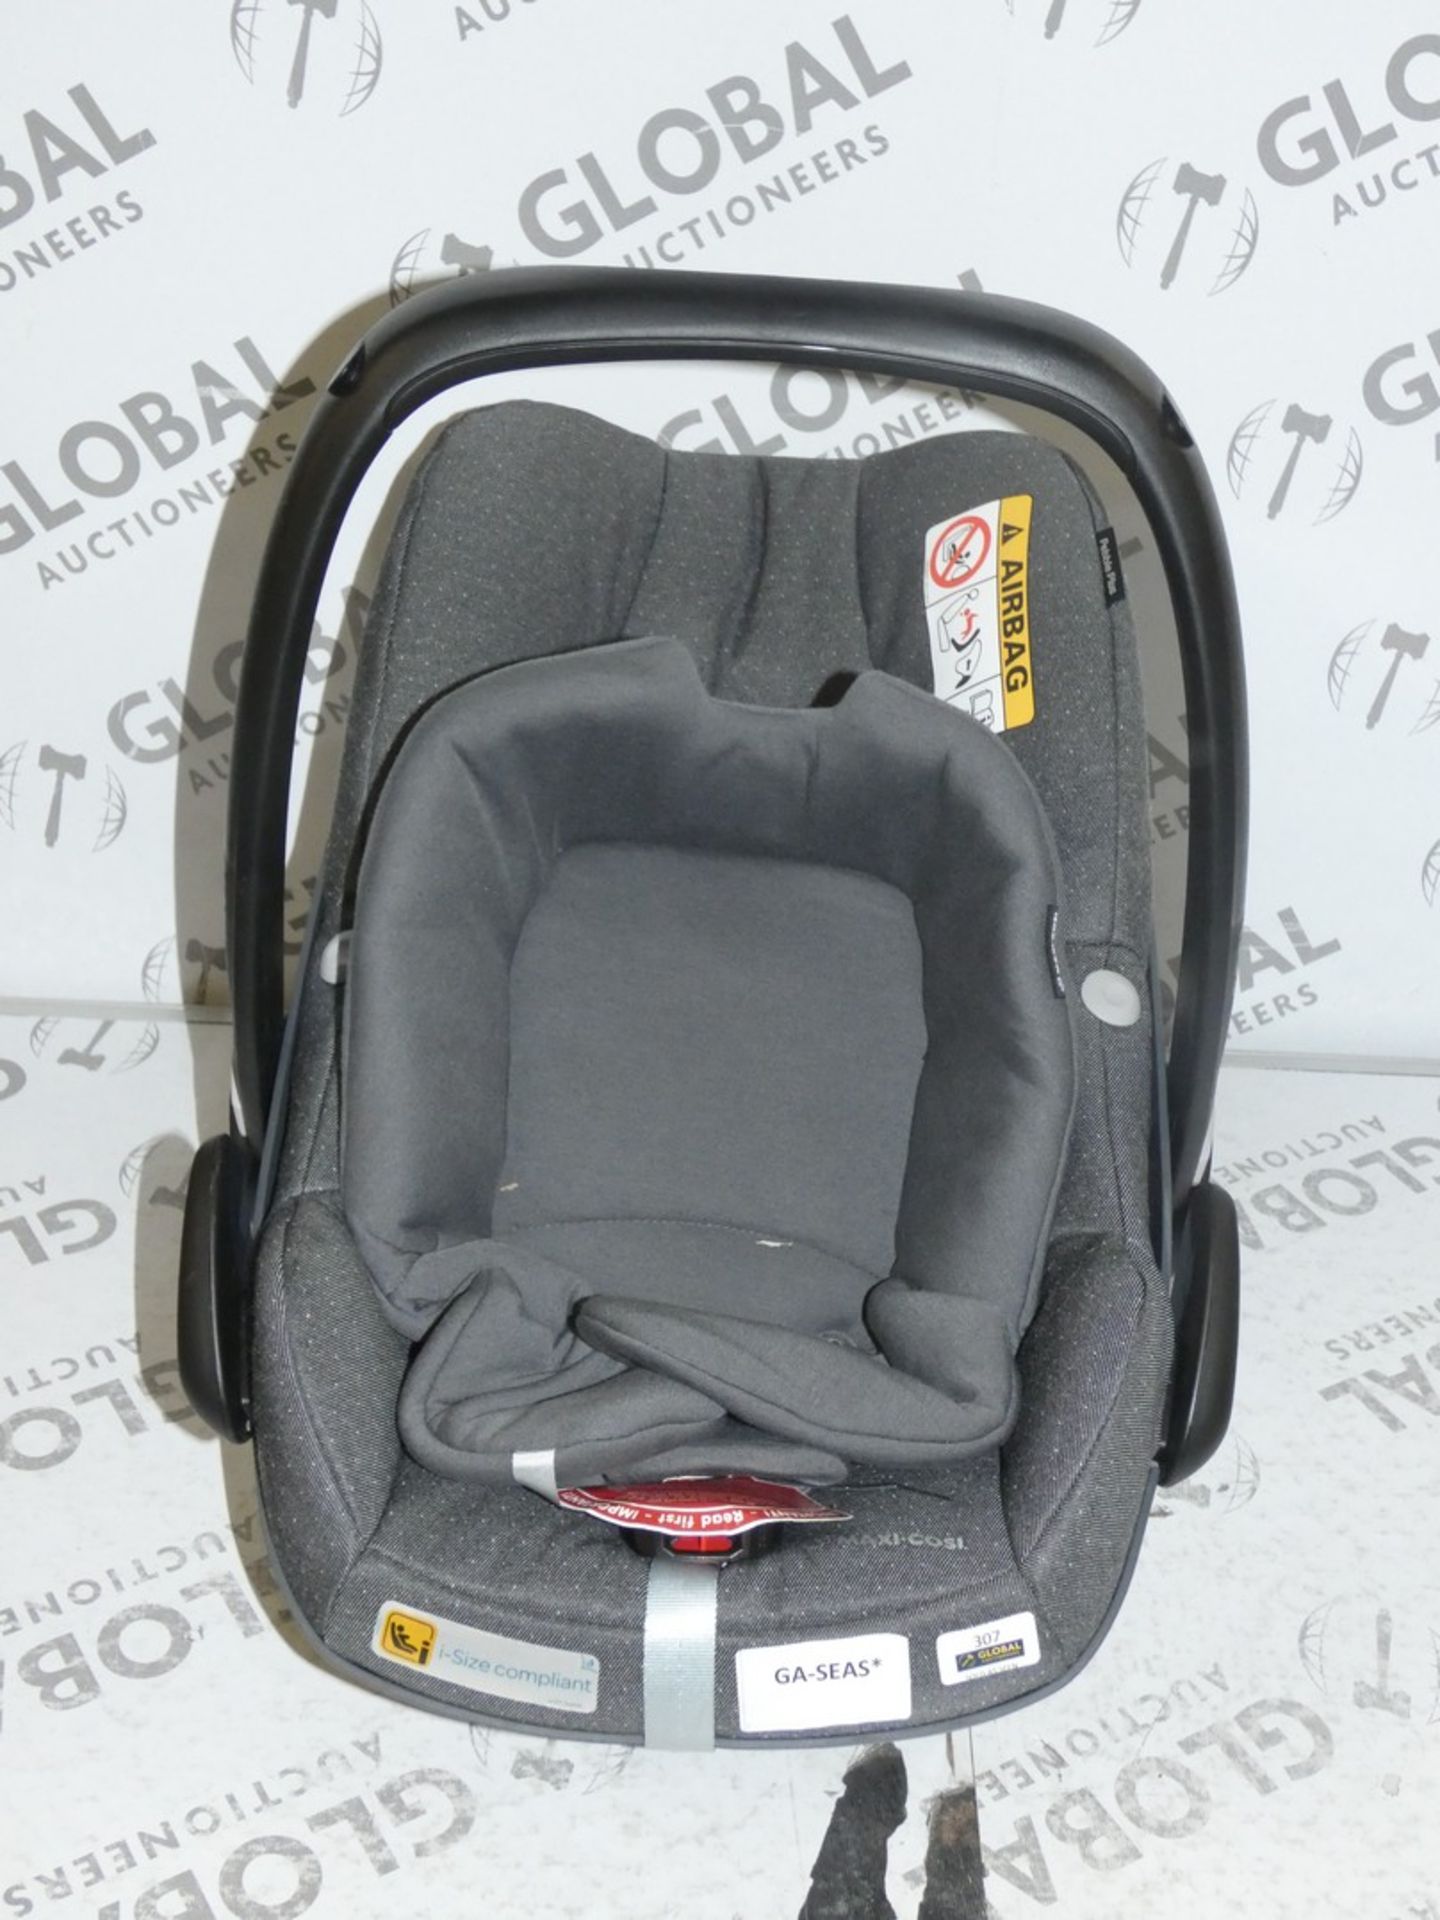 Maxi Cosy In Car Kids Safety Seat for Newborn